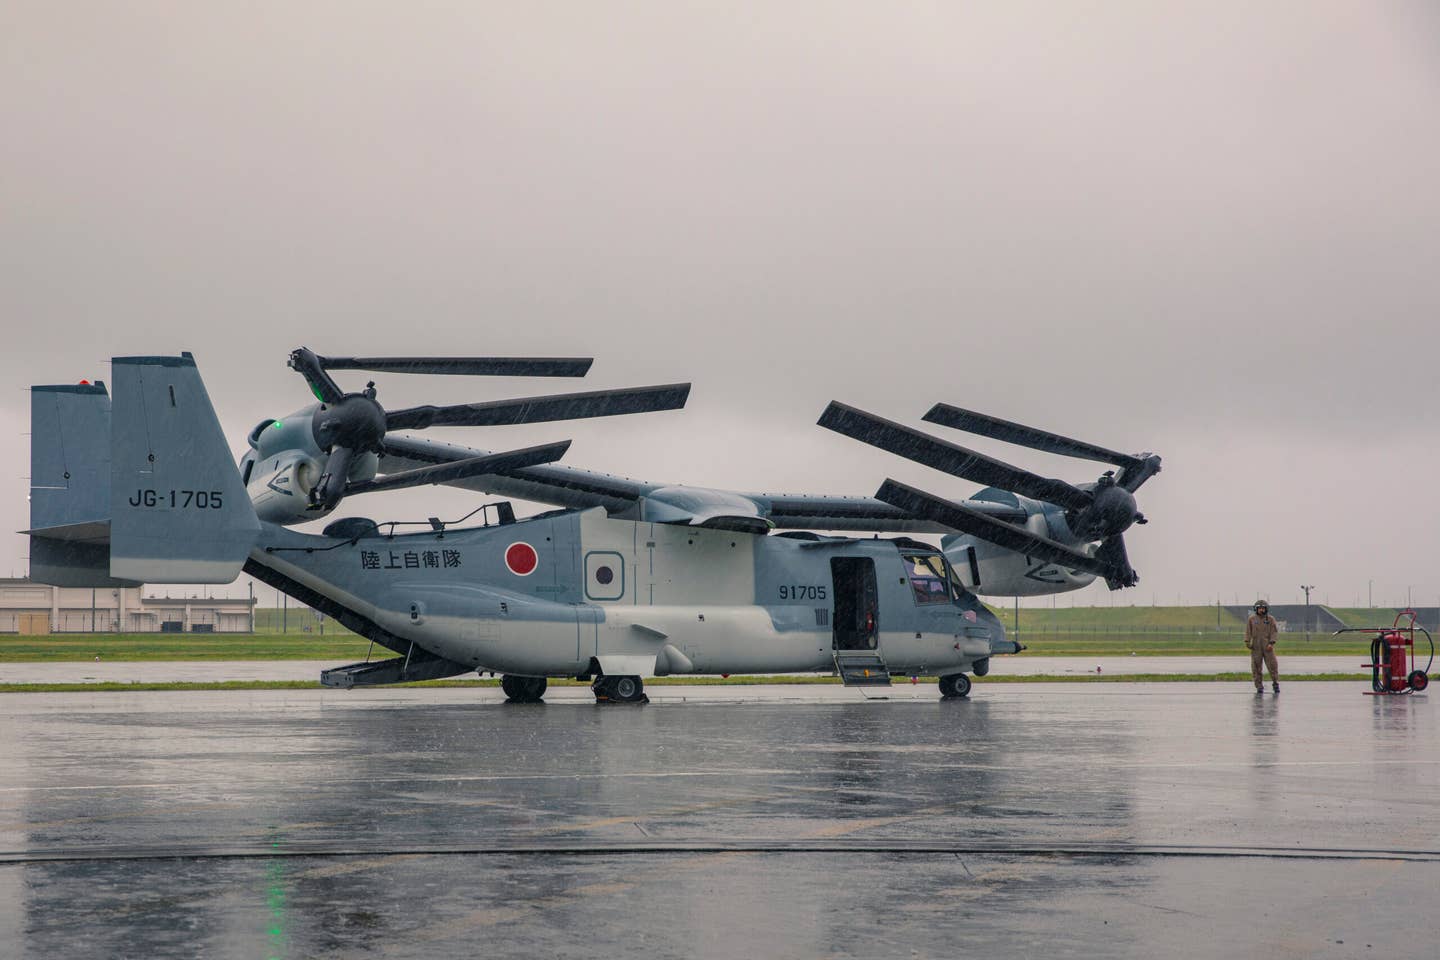 A V-22 bound for the Japan Ground Self-Defense Force based at Camp Kisarazu prepares to depart Marine Corps Air Station Iwakuni, Japan, July 6, 2020. The ferry flight from Iwakuni marked the delivery of the first V-22 to the Japan Self-Defense Force. <em>U.S. Marine Corps photo by Cpl. Lauren Brune/Released</em>